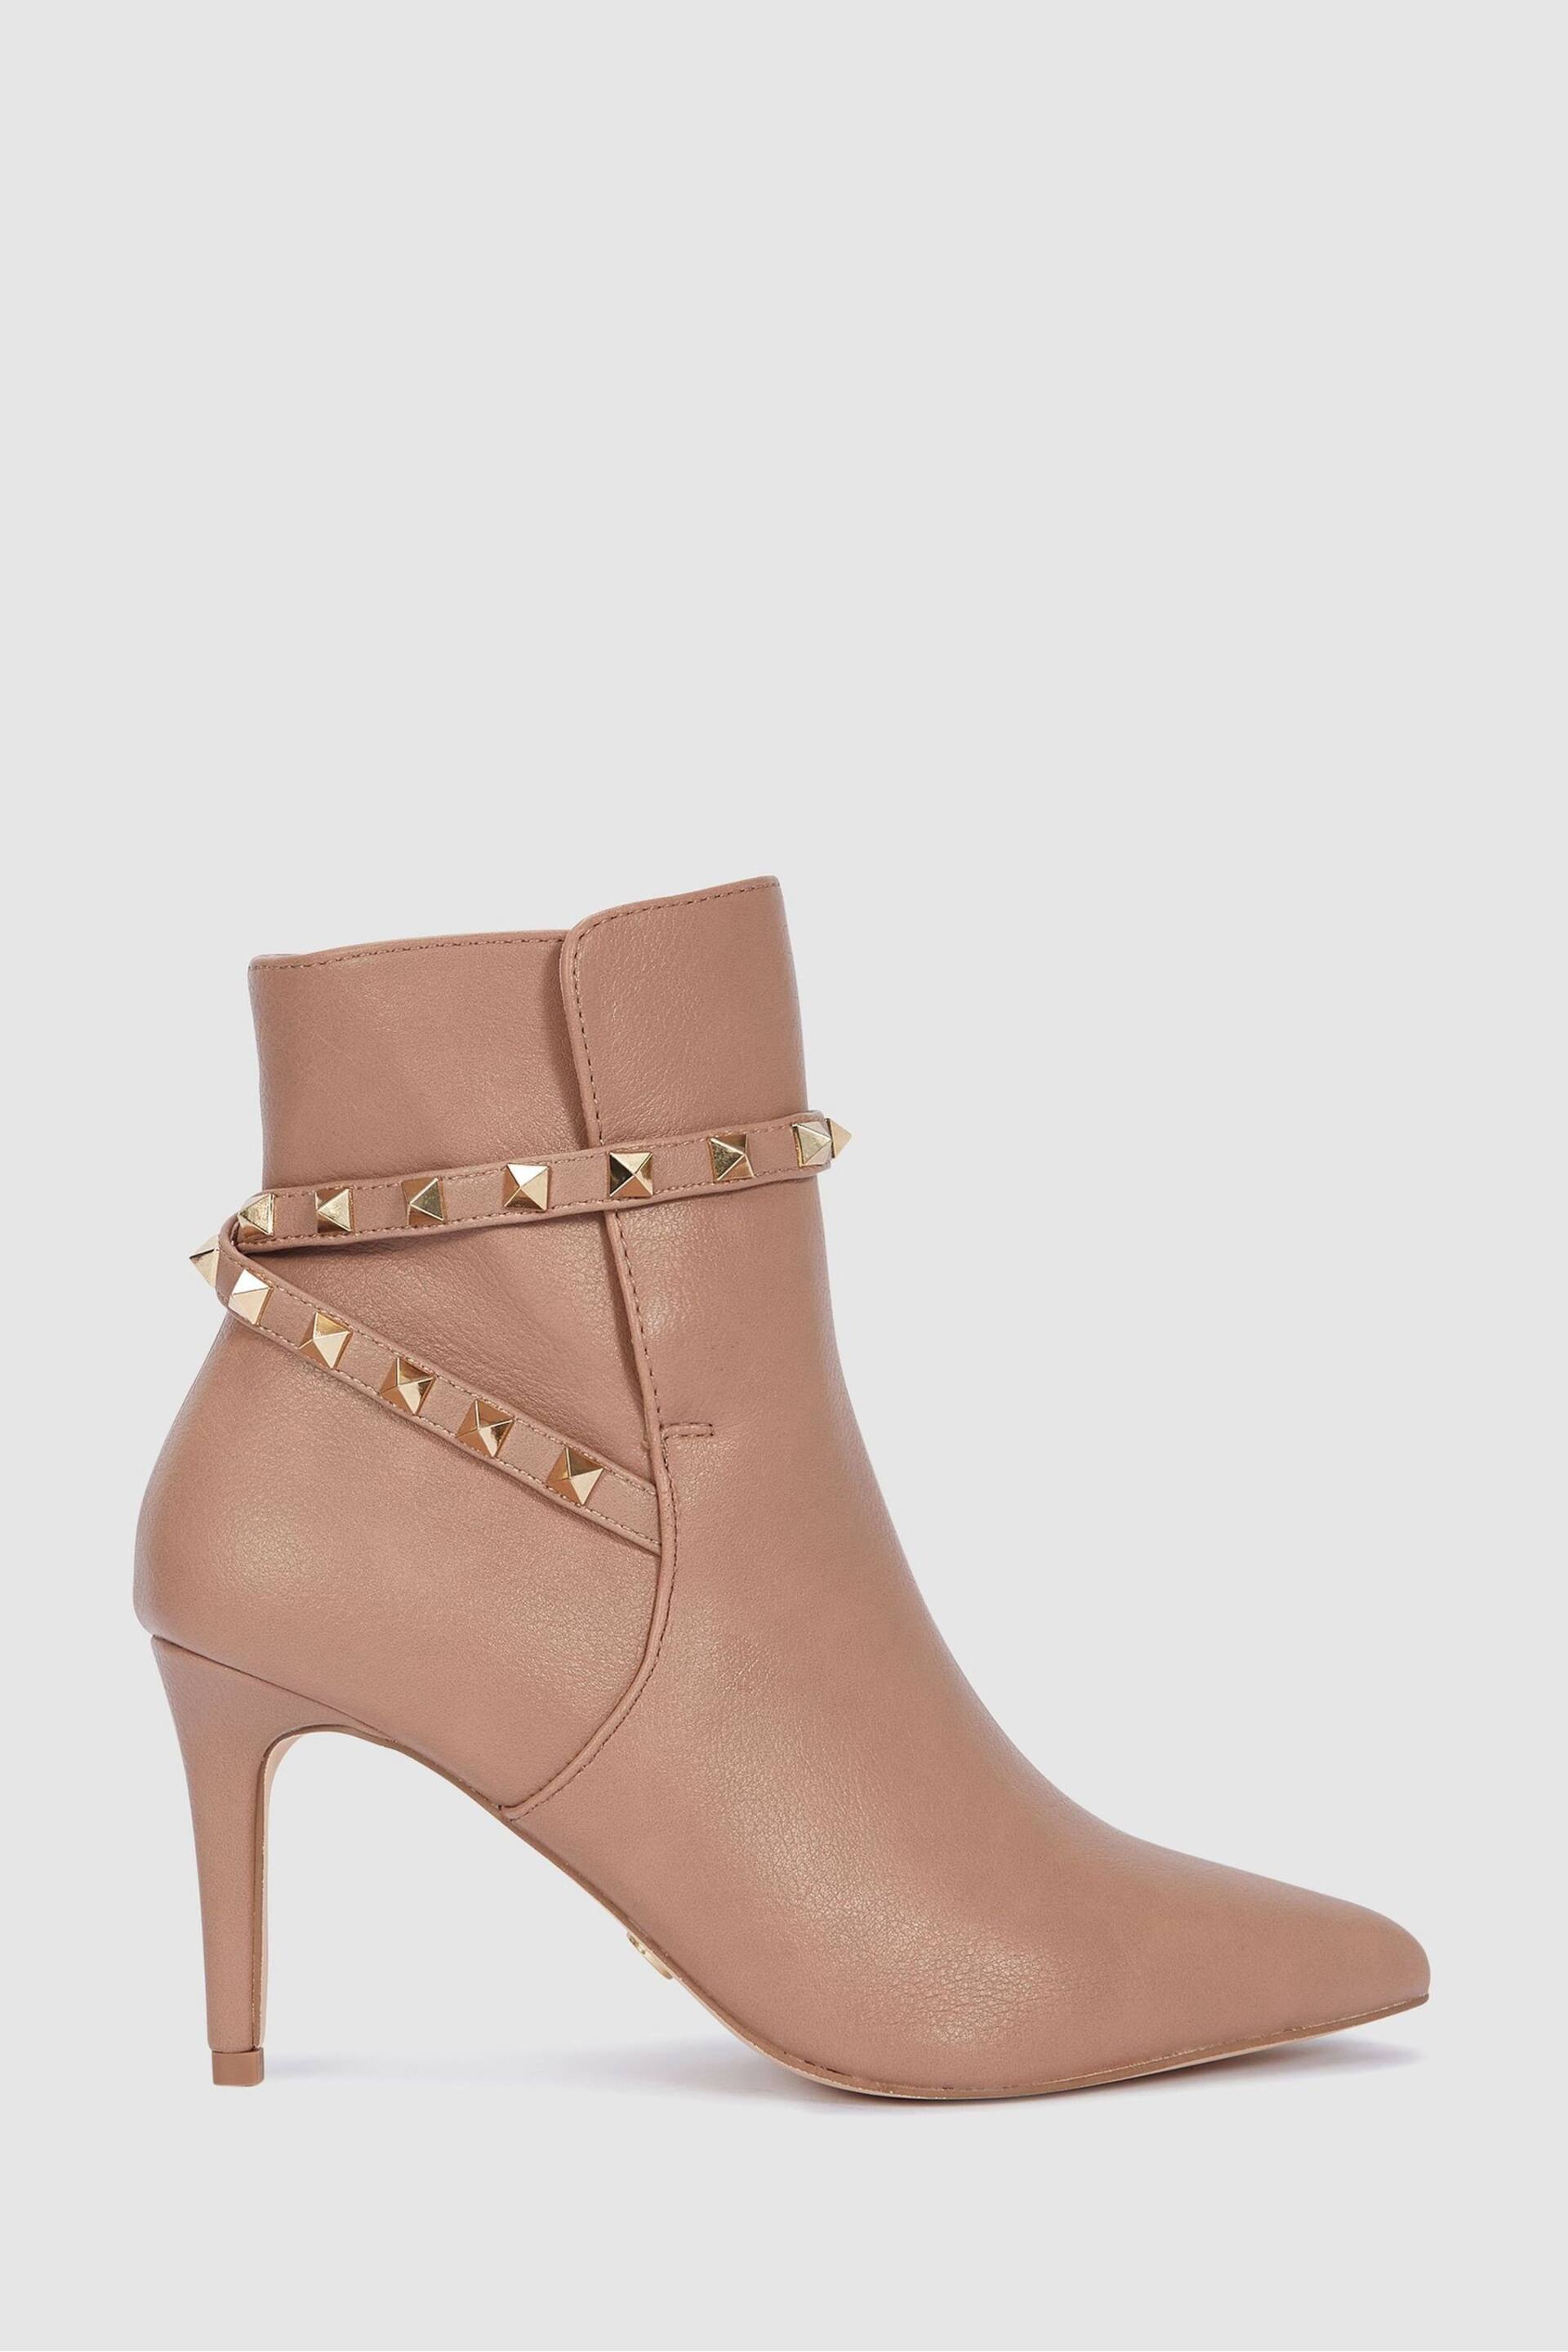 Novo Nude Diego Stud Detail Point Mid Stiletto Heel Ankle Boots - Image 2 of 4